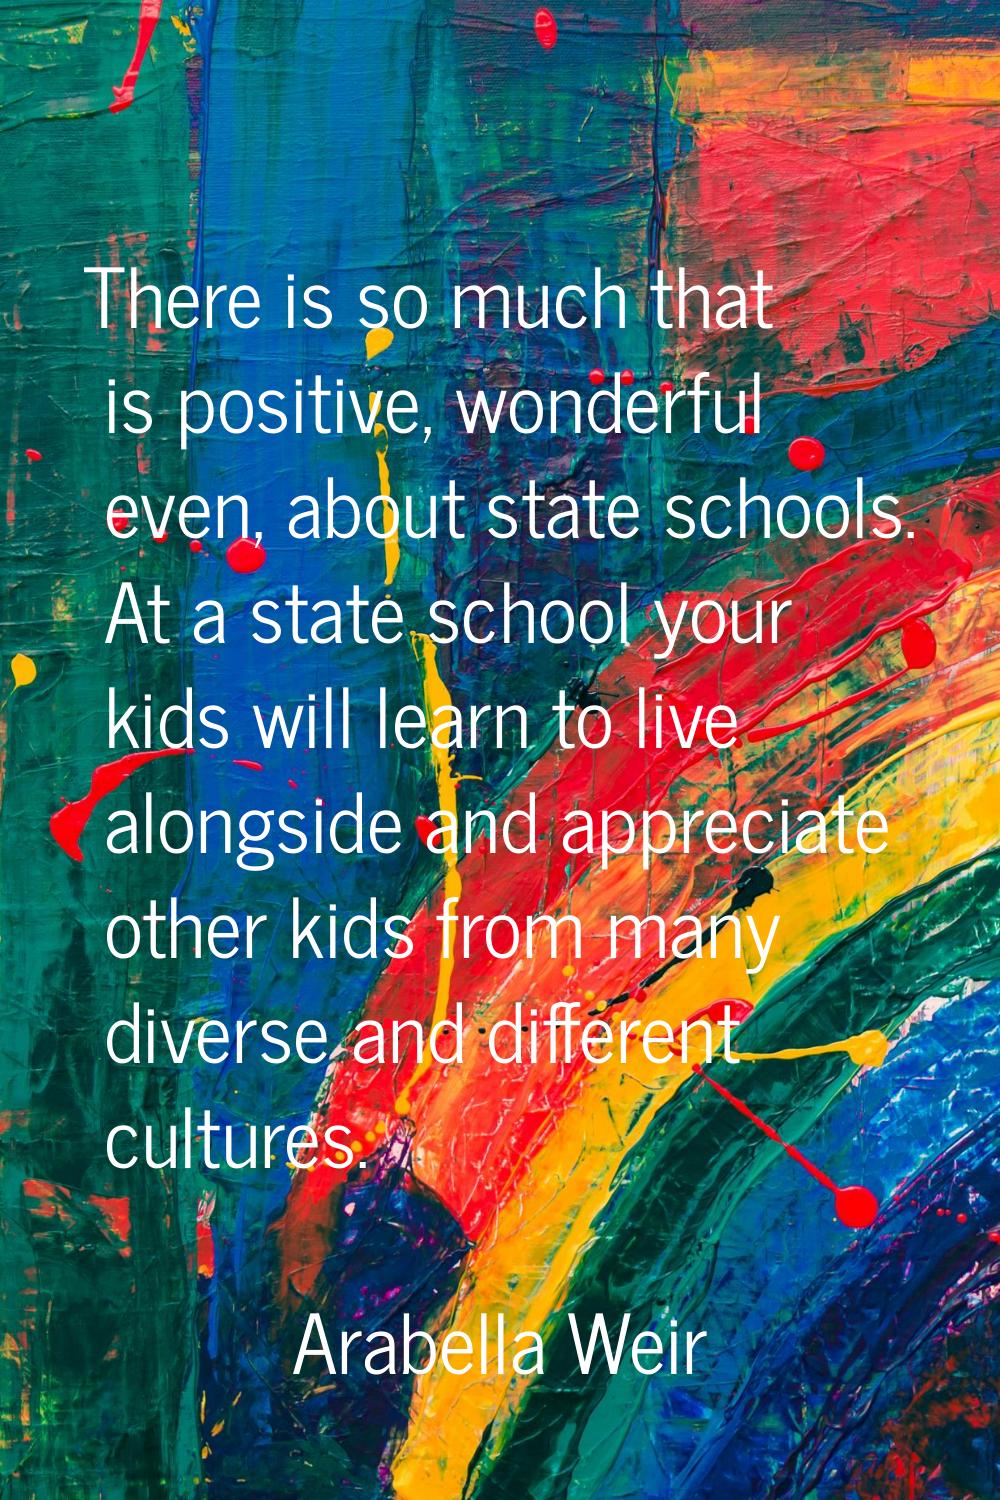 There is so much that is positive, wonderful even, about state schools. At a state school your kids